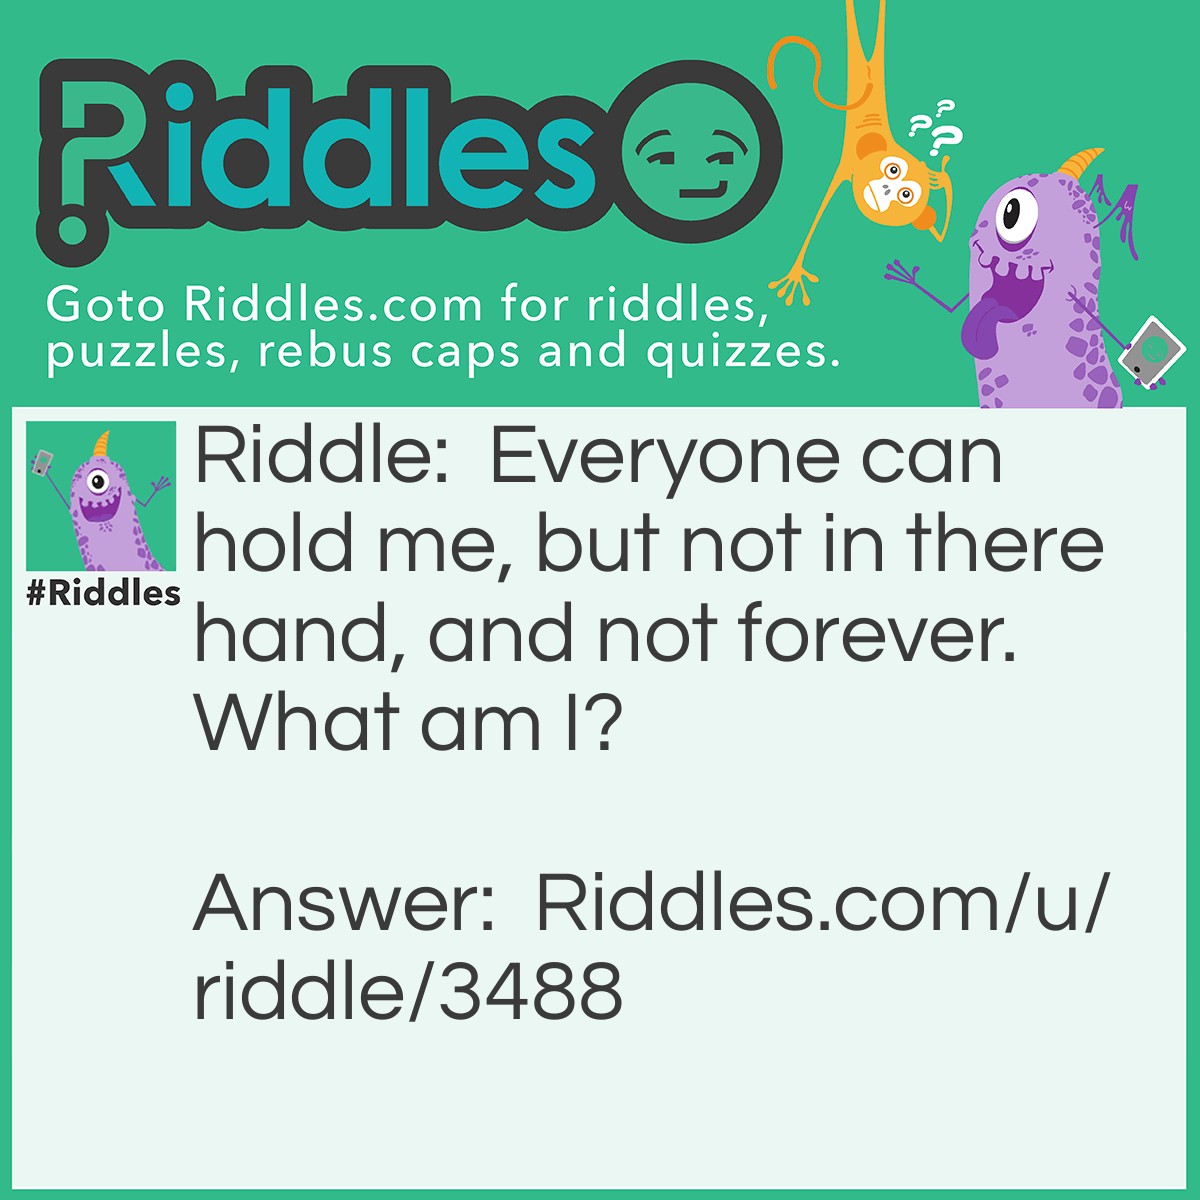 Riddle: Everyone can hold me, but not in there hand, and not forever. What am I? Answer: Your breath.